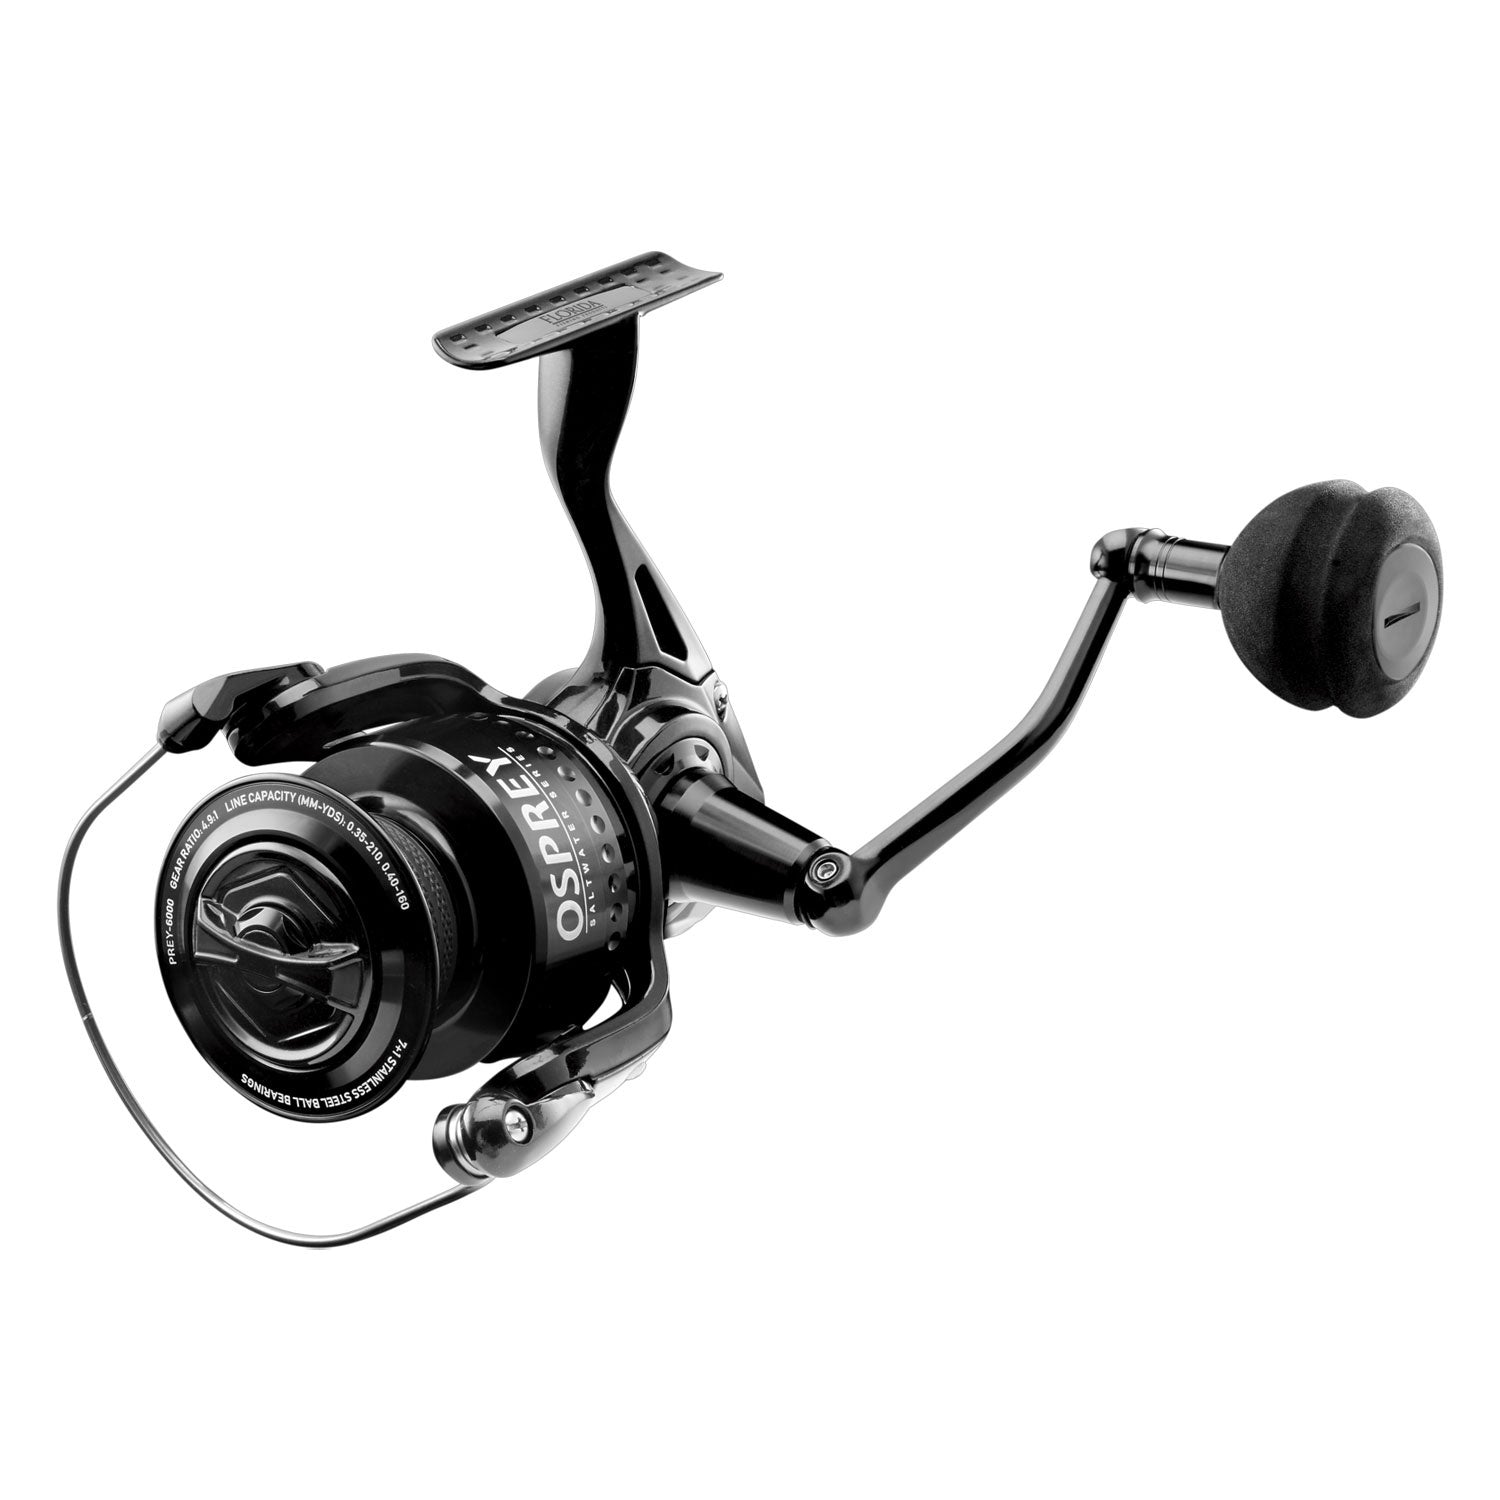 Florida Fishing Products Osprey SS Spinning Reel 5000 - Andy Thornal Company